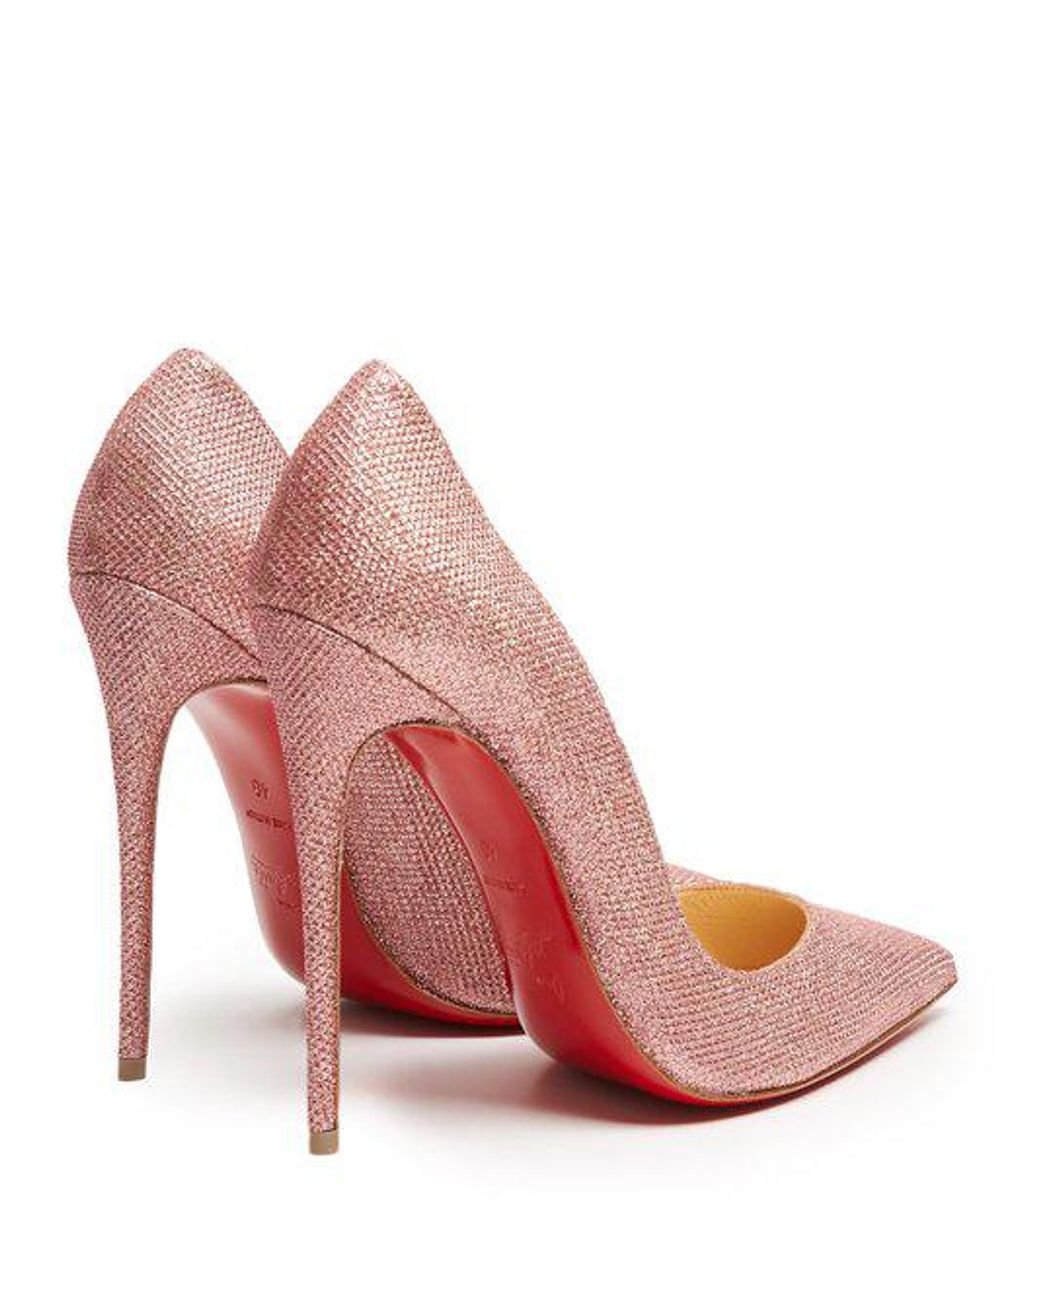 Christian Louboutin Canvas So Kate 120mm Glitter Pumps in Pink | Lyst